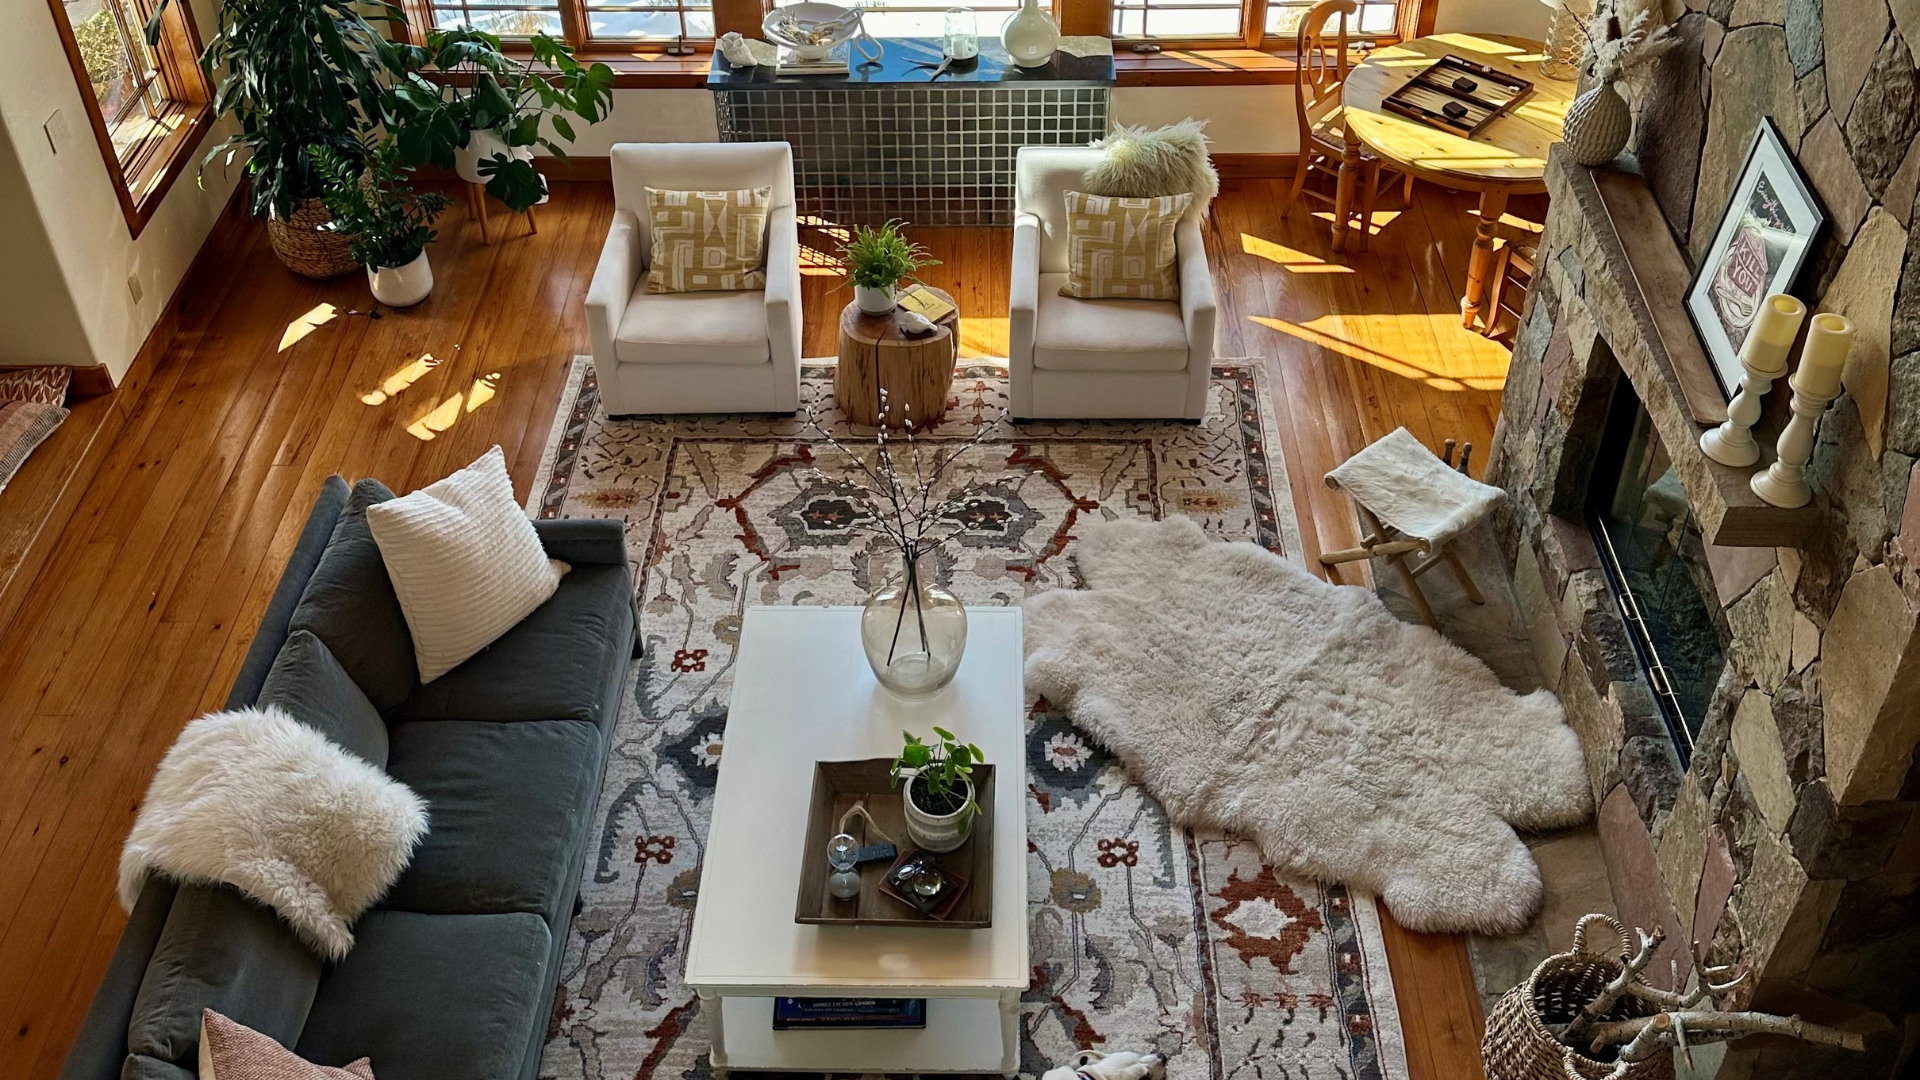 patterned, floral area rug in living area with sectional and stone fireplace